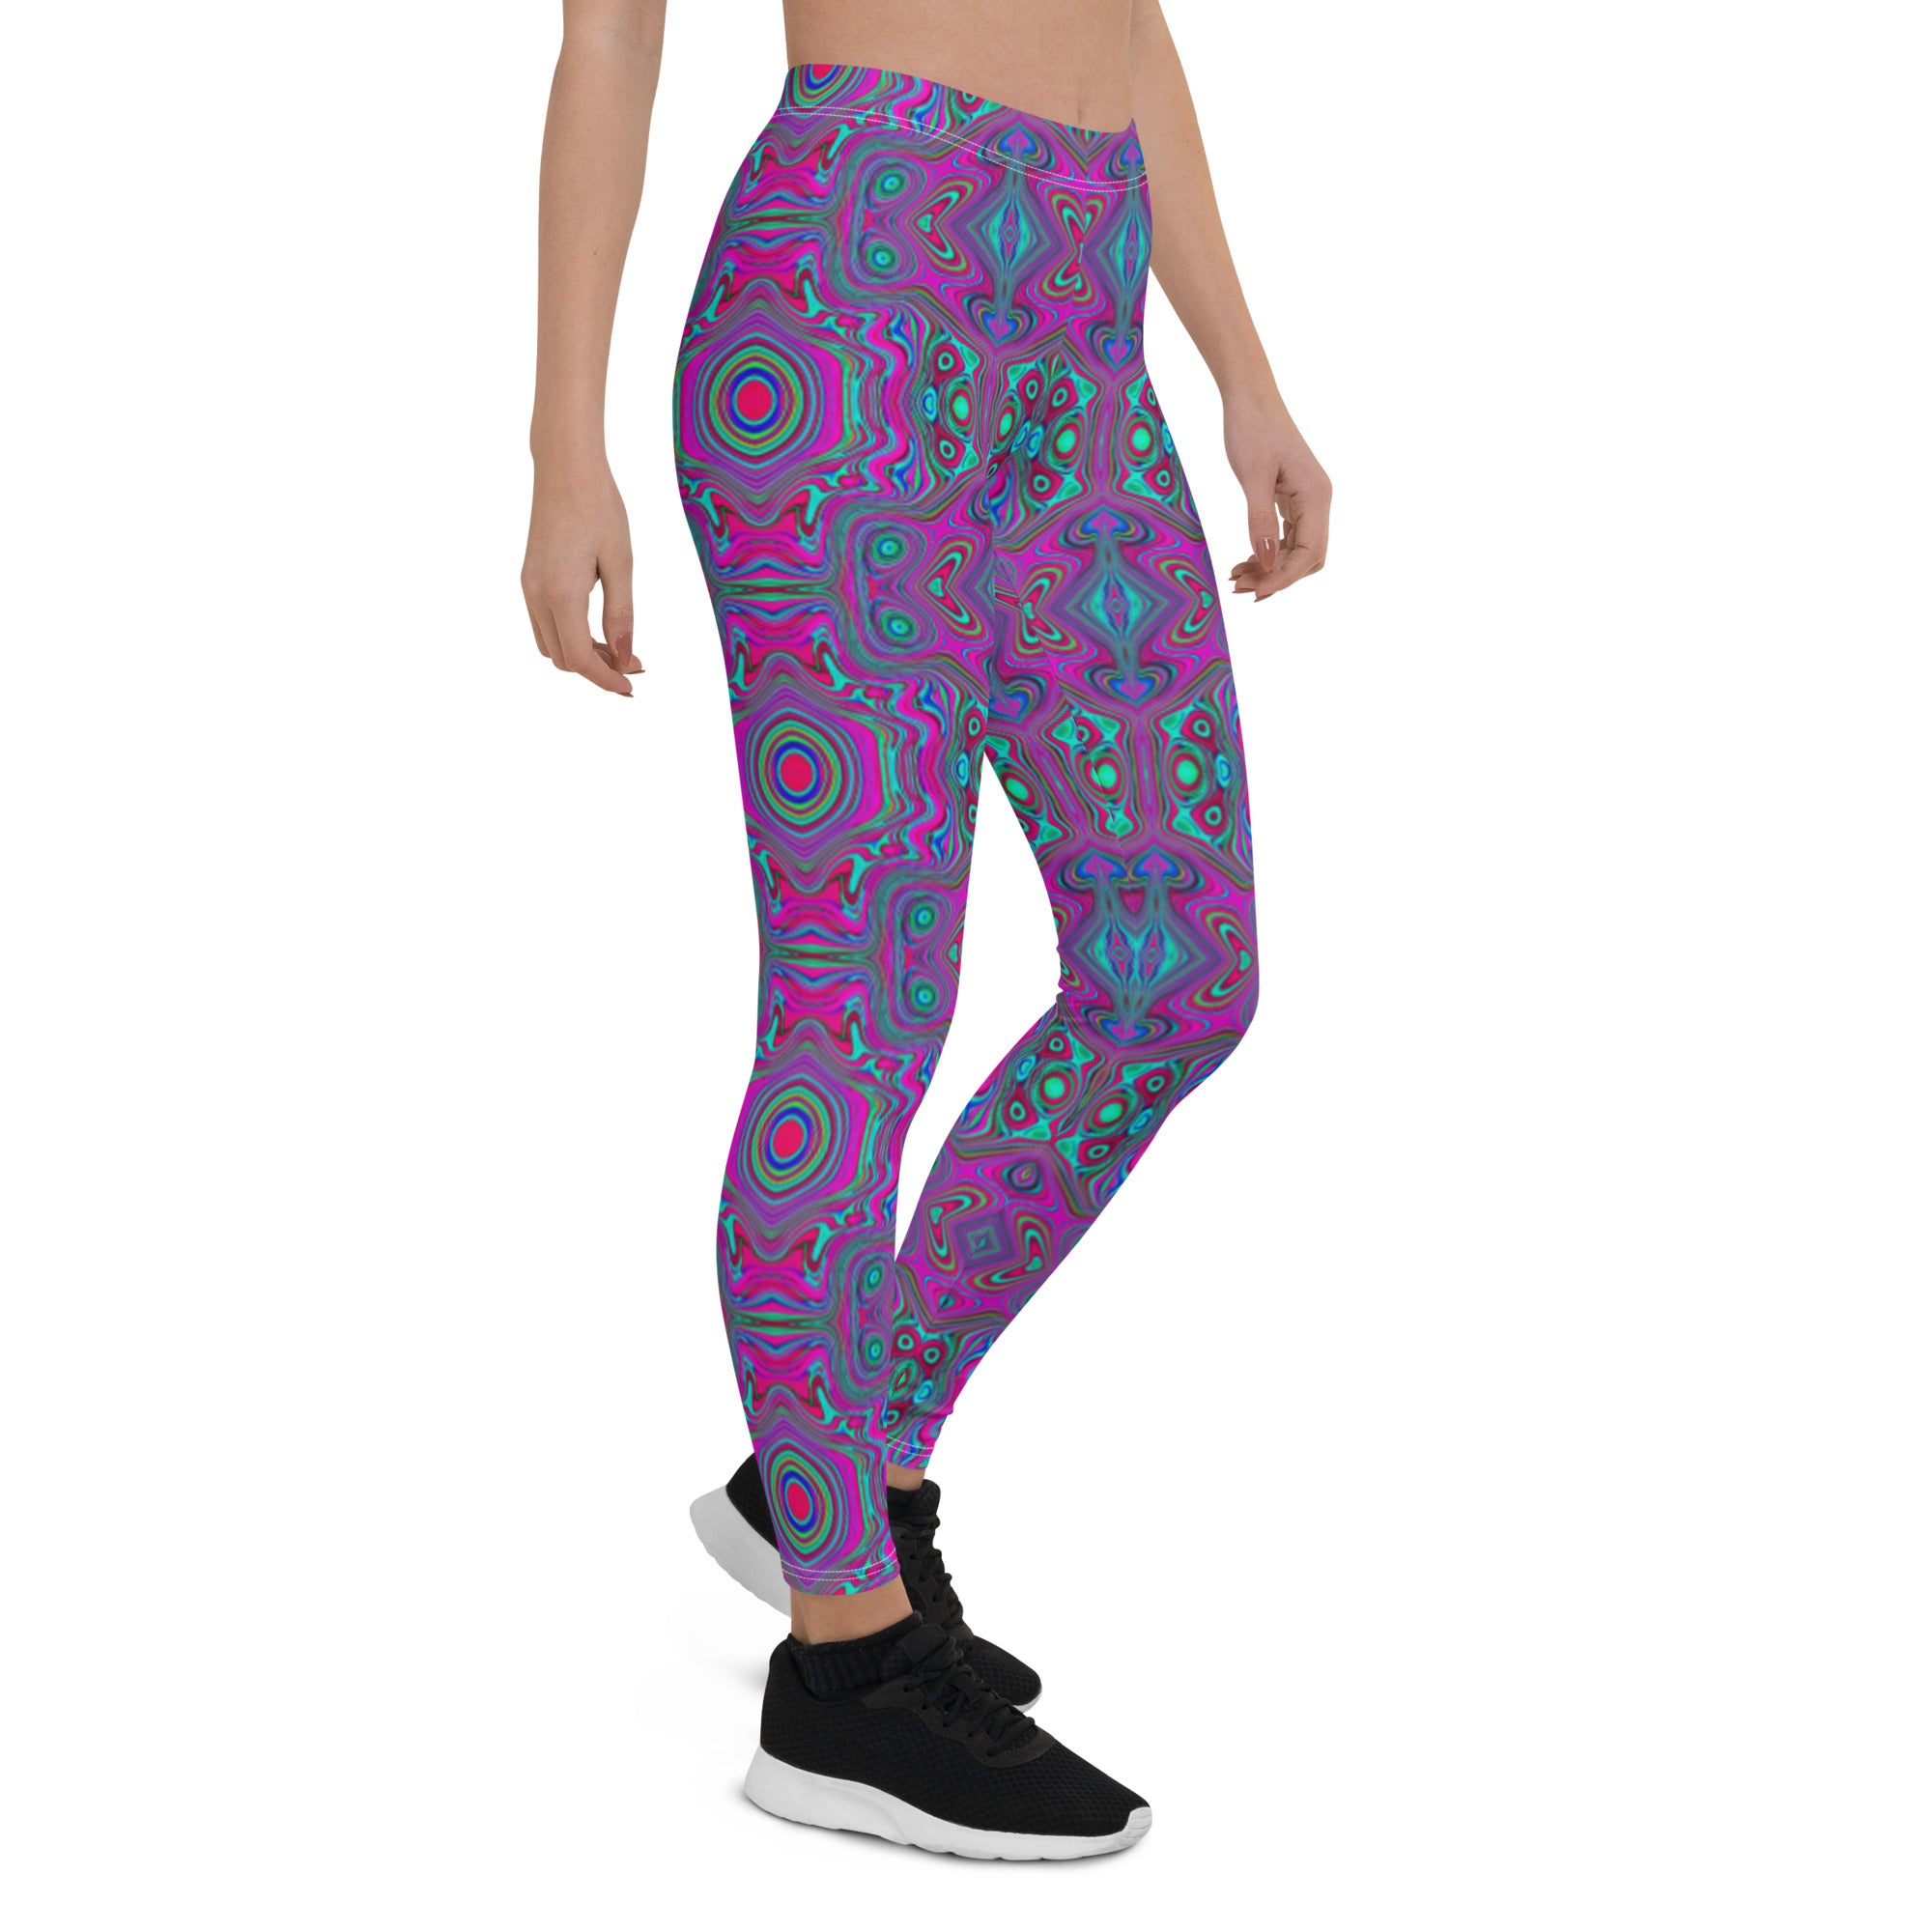 Leggings for Women, Trippy Retro Magenta, Blue and Green Abstract